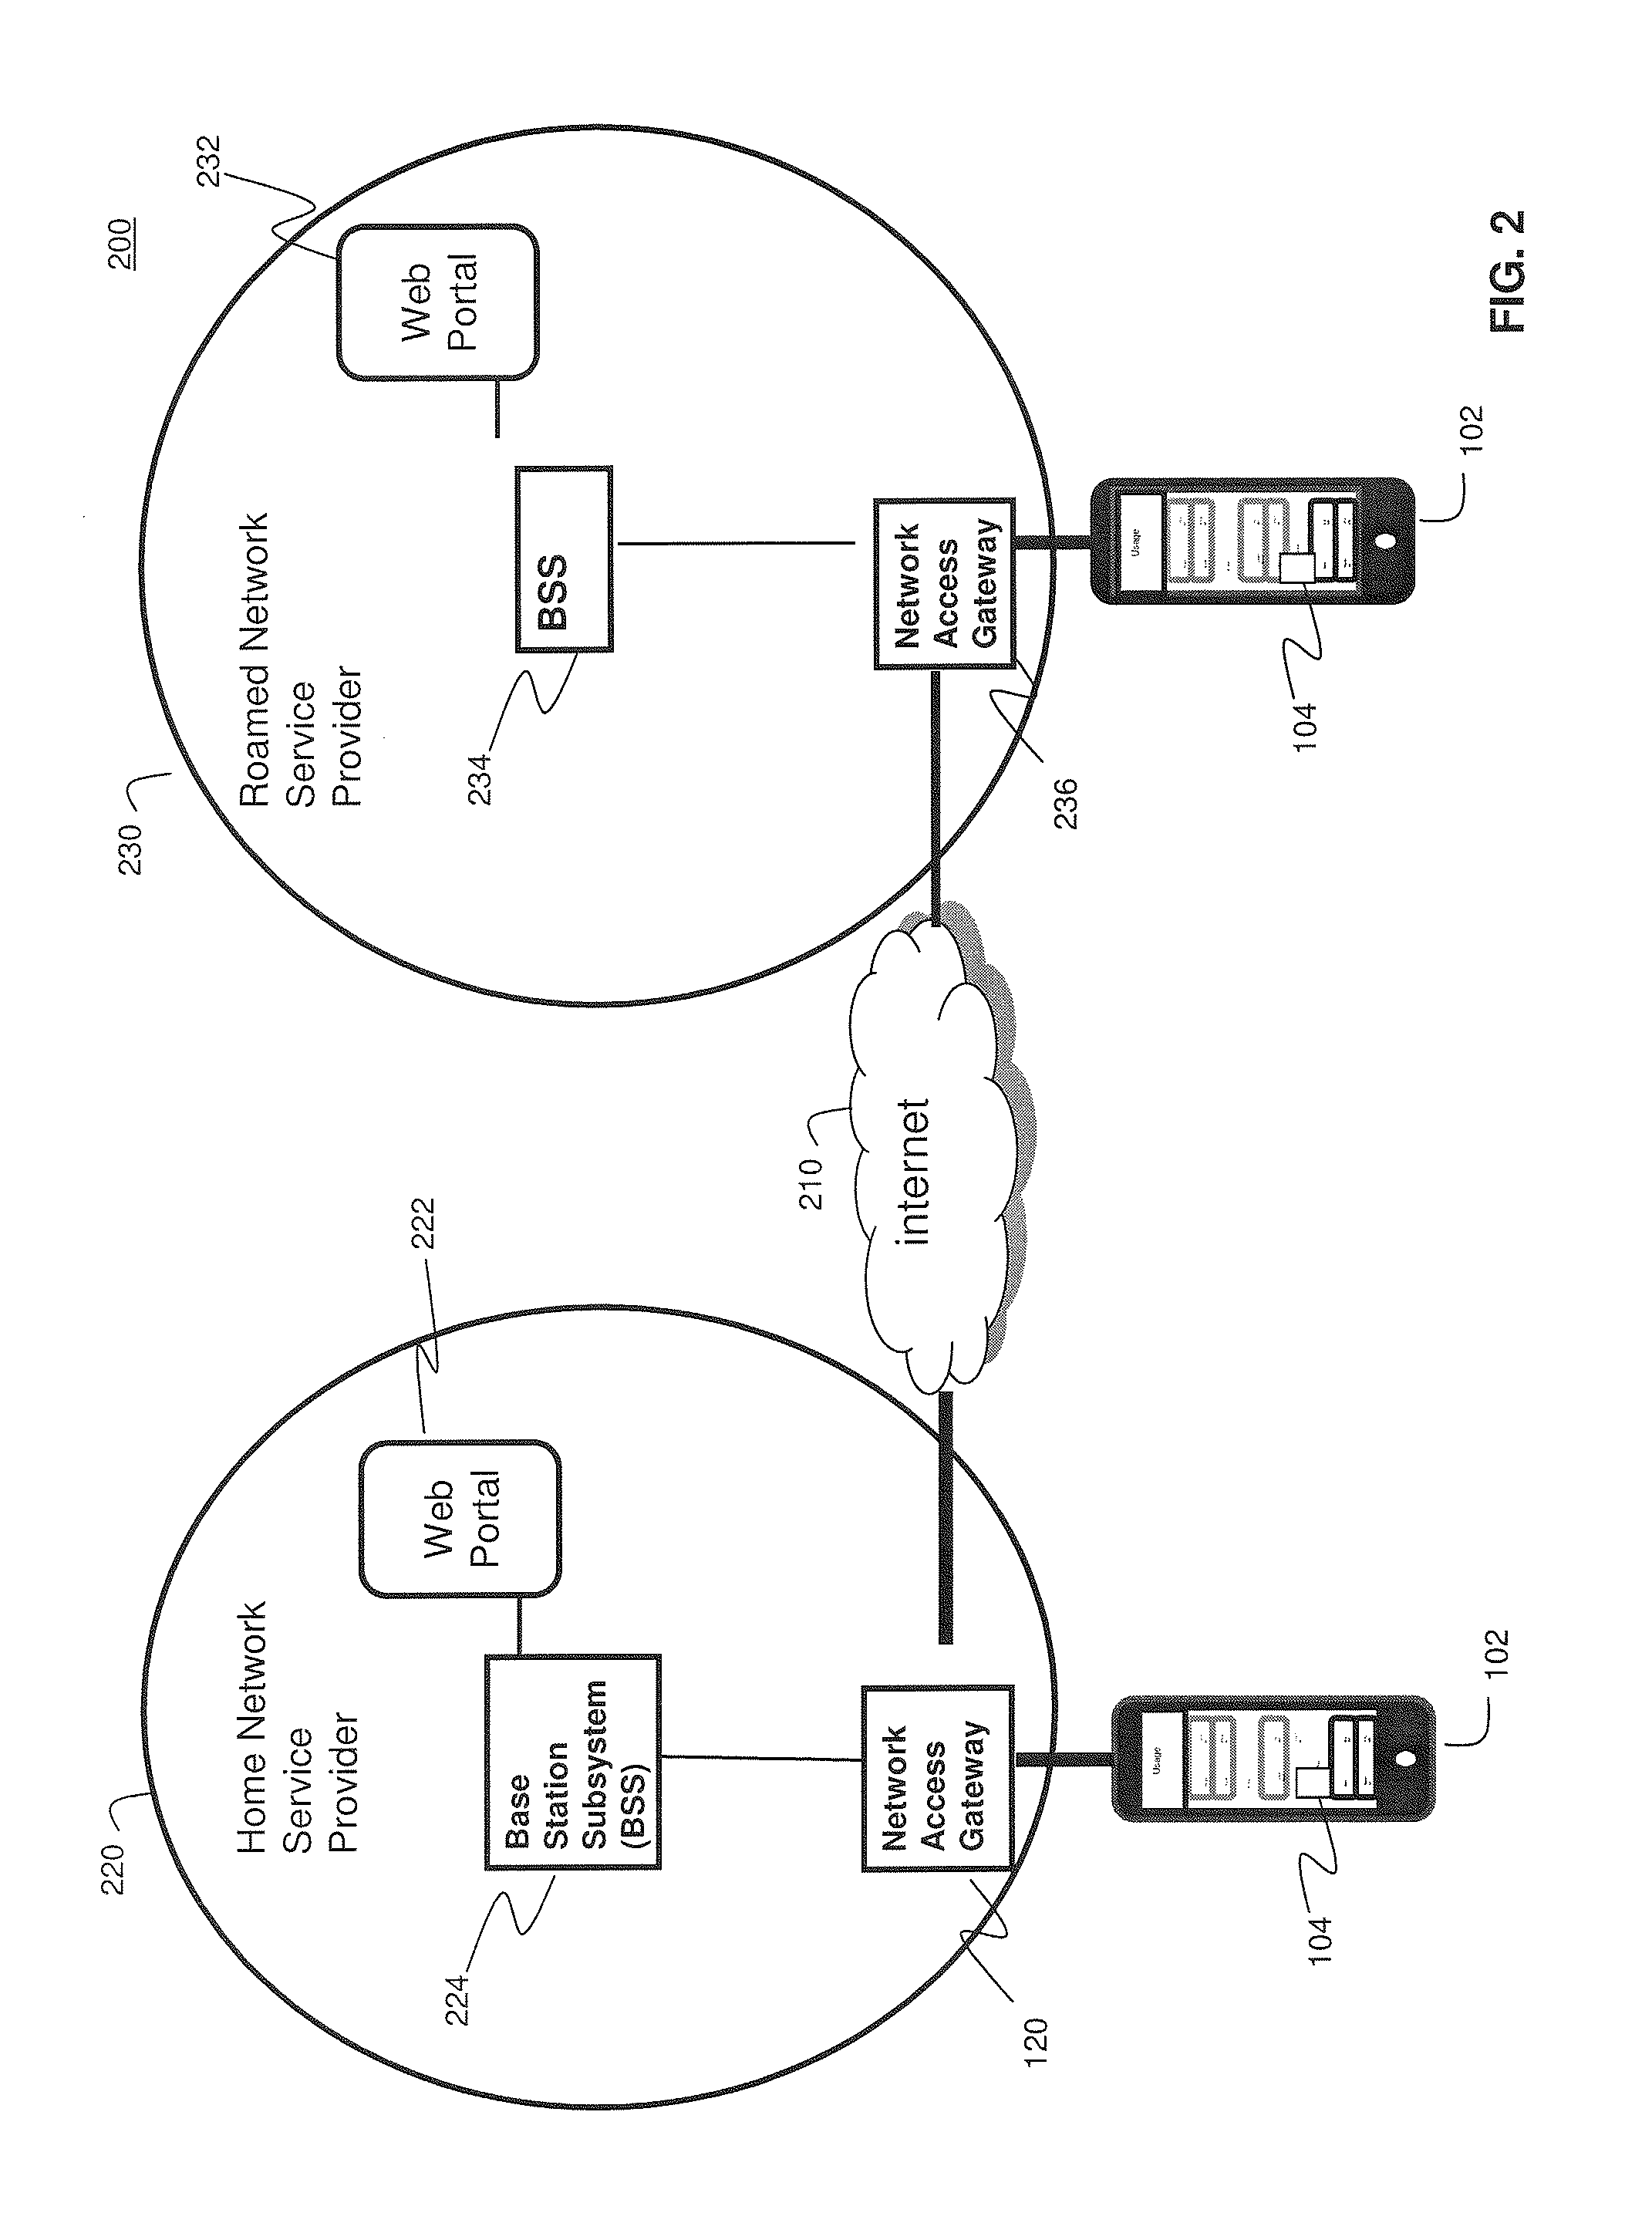 System and Methods for Carrier-Centric Mobile Device Data Communications Cost Monitoring and Control